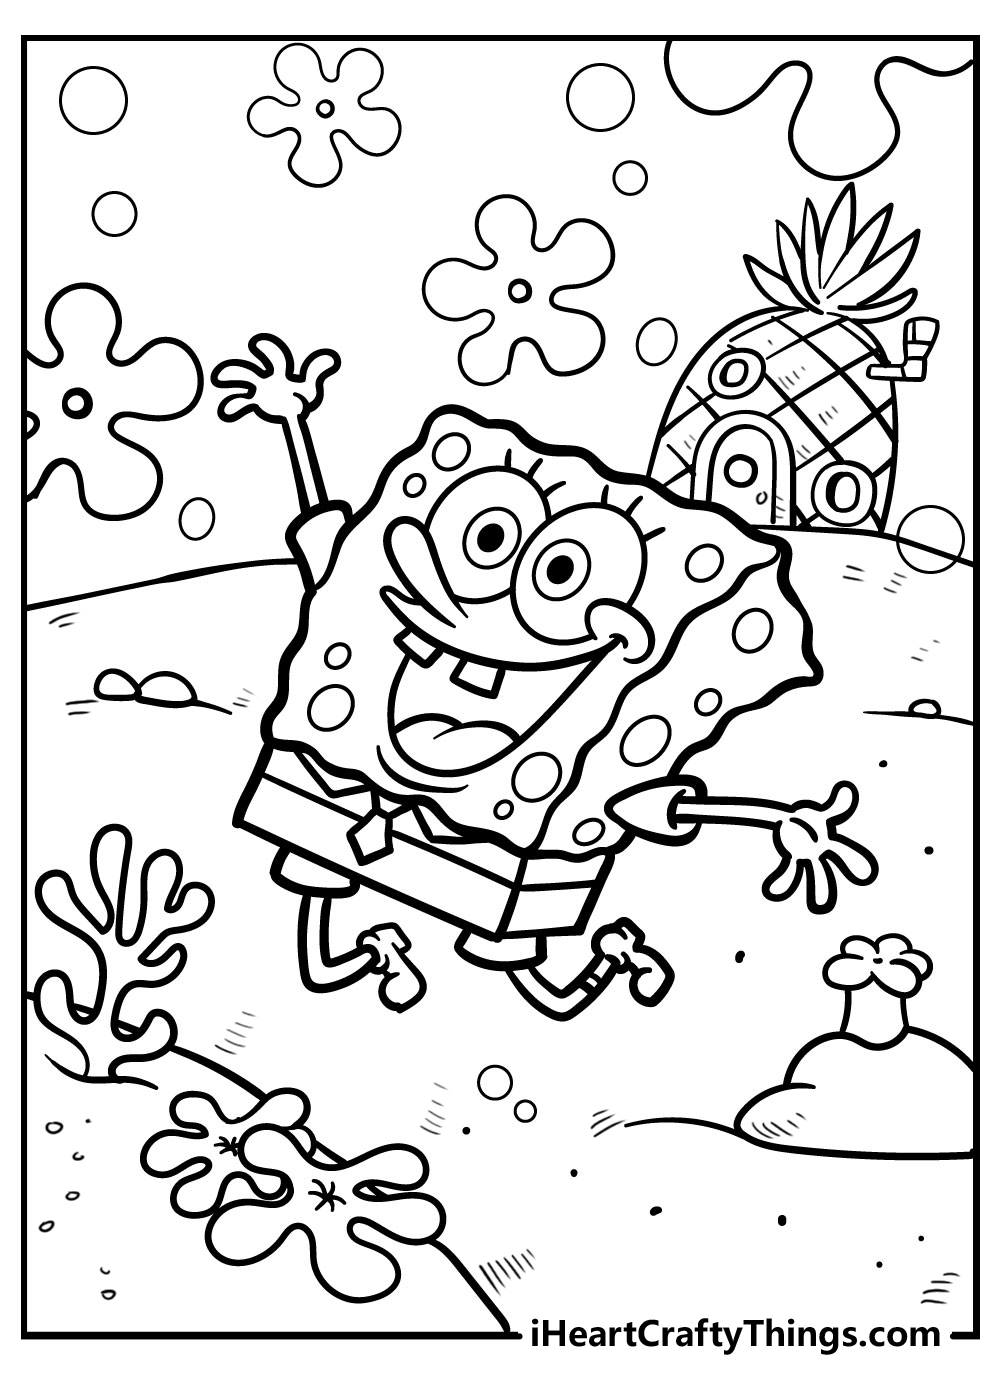 Spongebob Coloring Pages For You